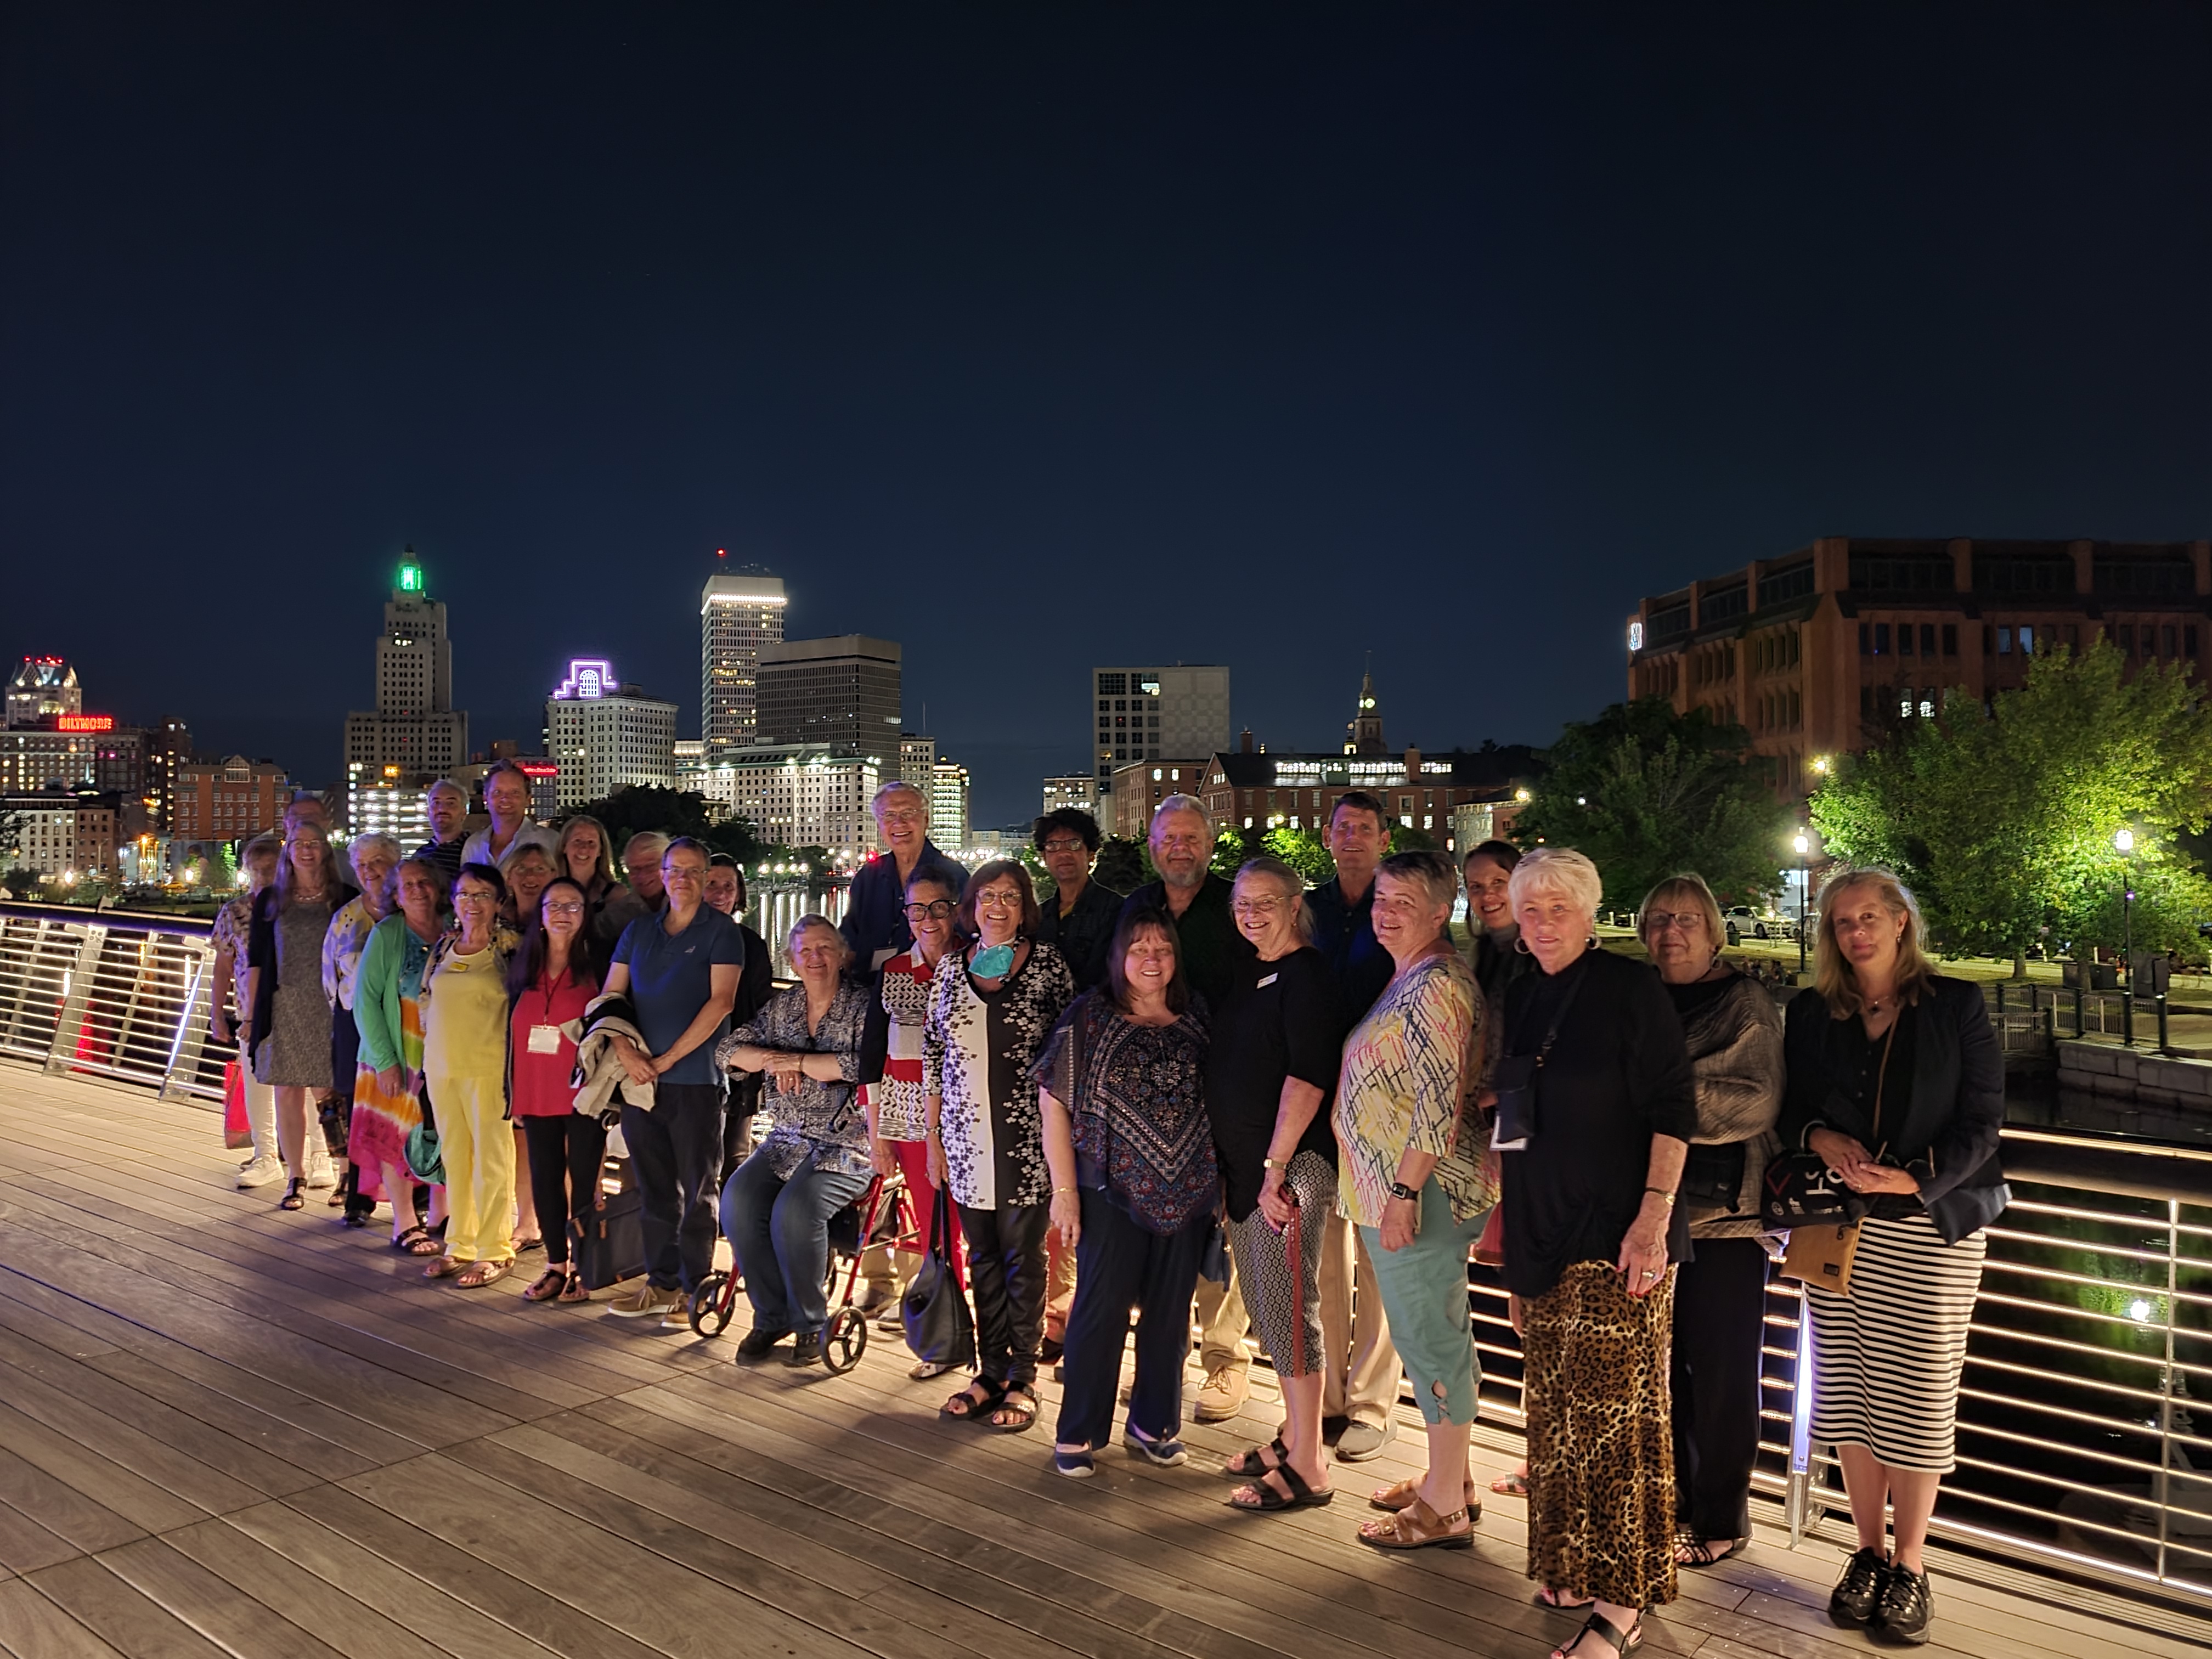 Tourists on the Providence Pedestrian Bridge at night - an experience included in the An Evening in the City Tour.